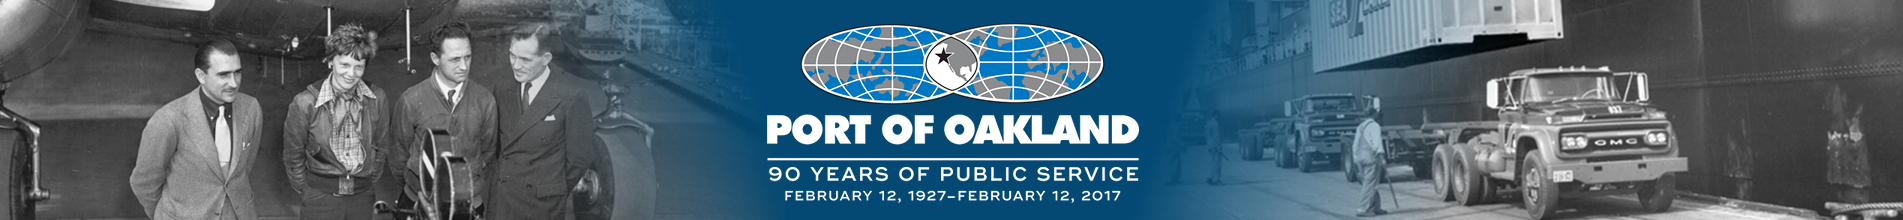 Header Image of [:en]90 Years of Public Service[:zh]Port of Oakland - 90th Anniversary[:]